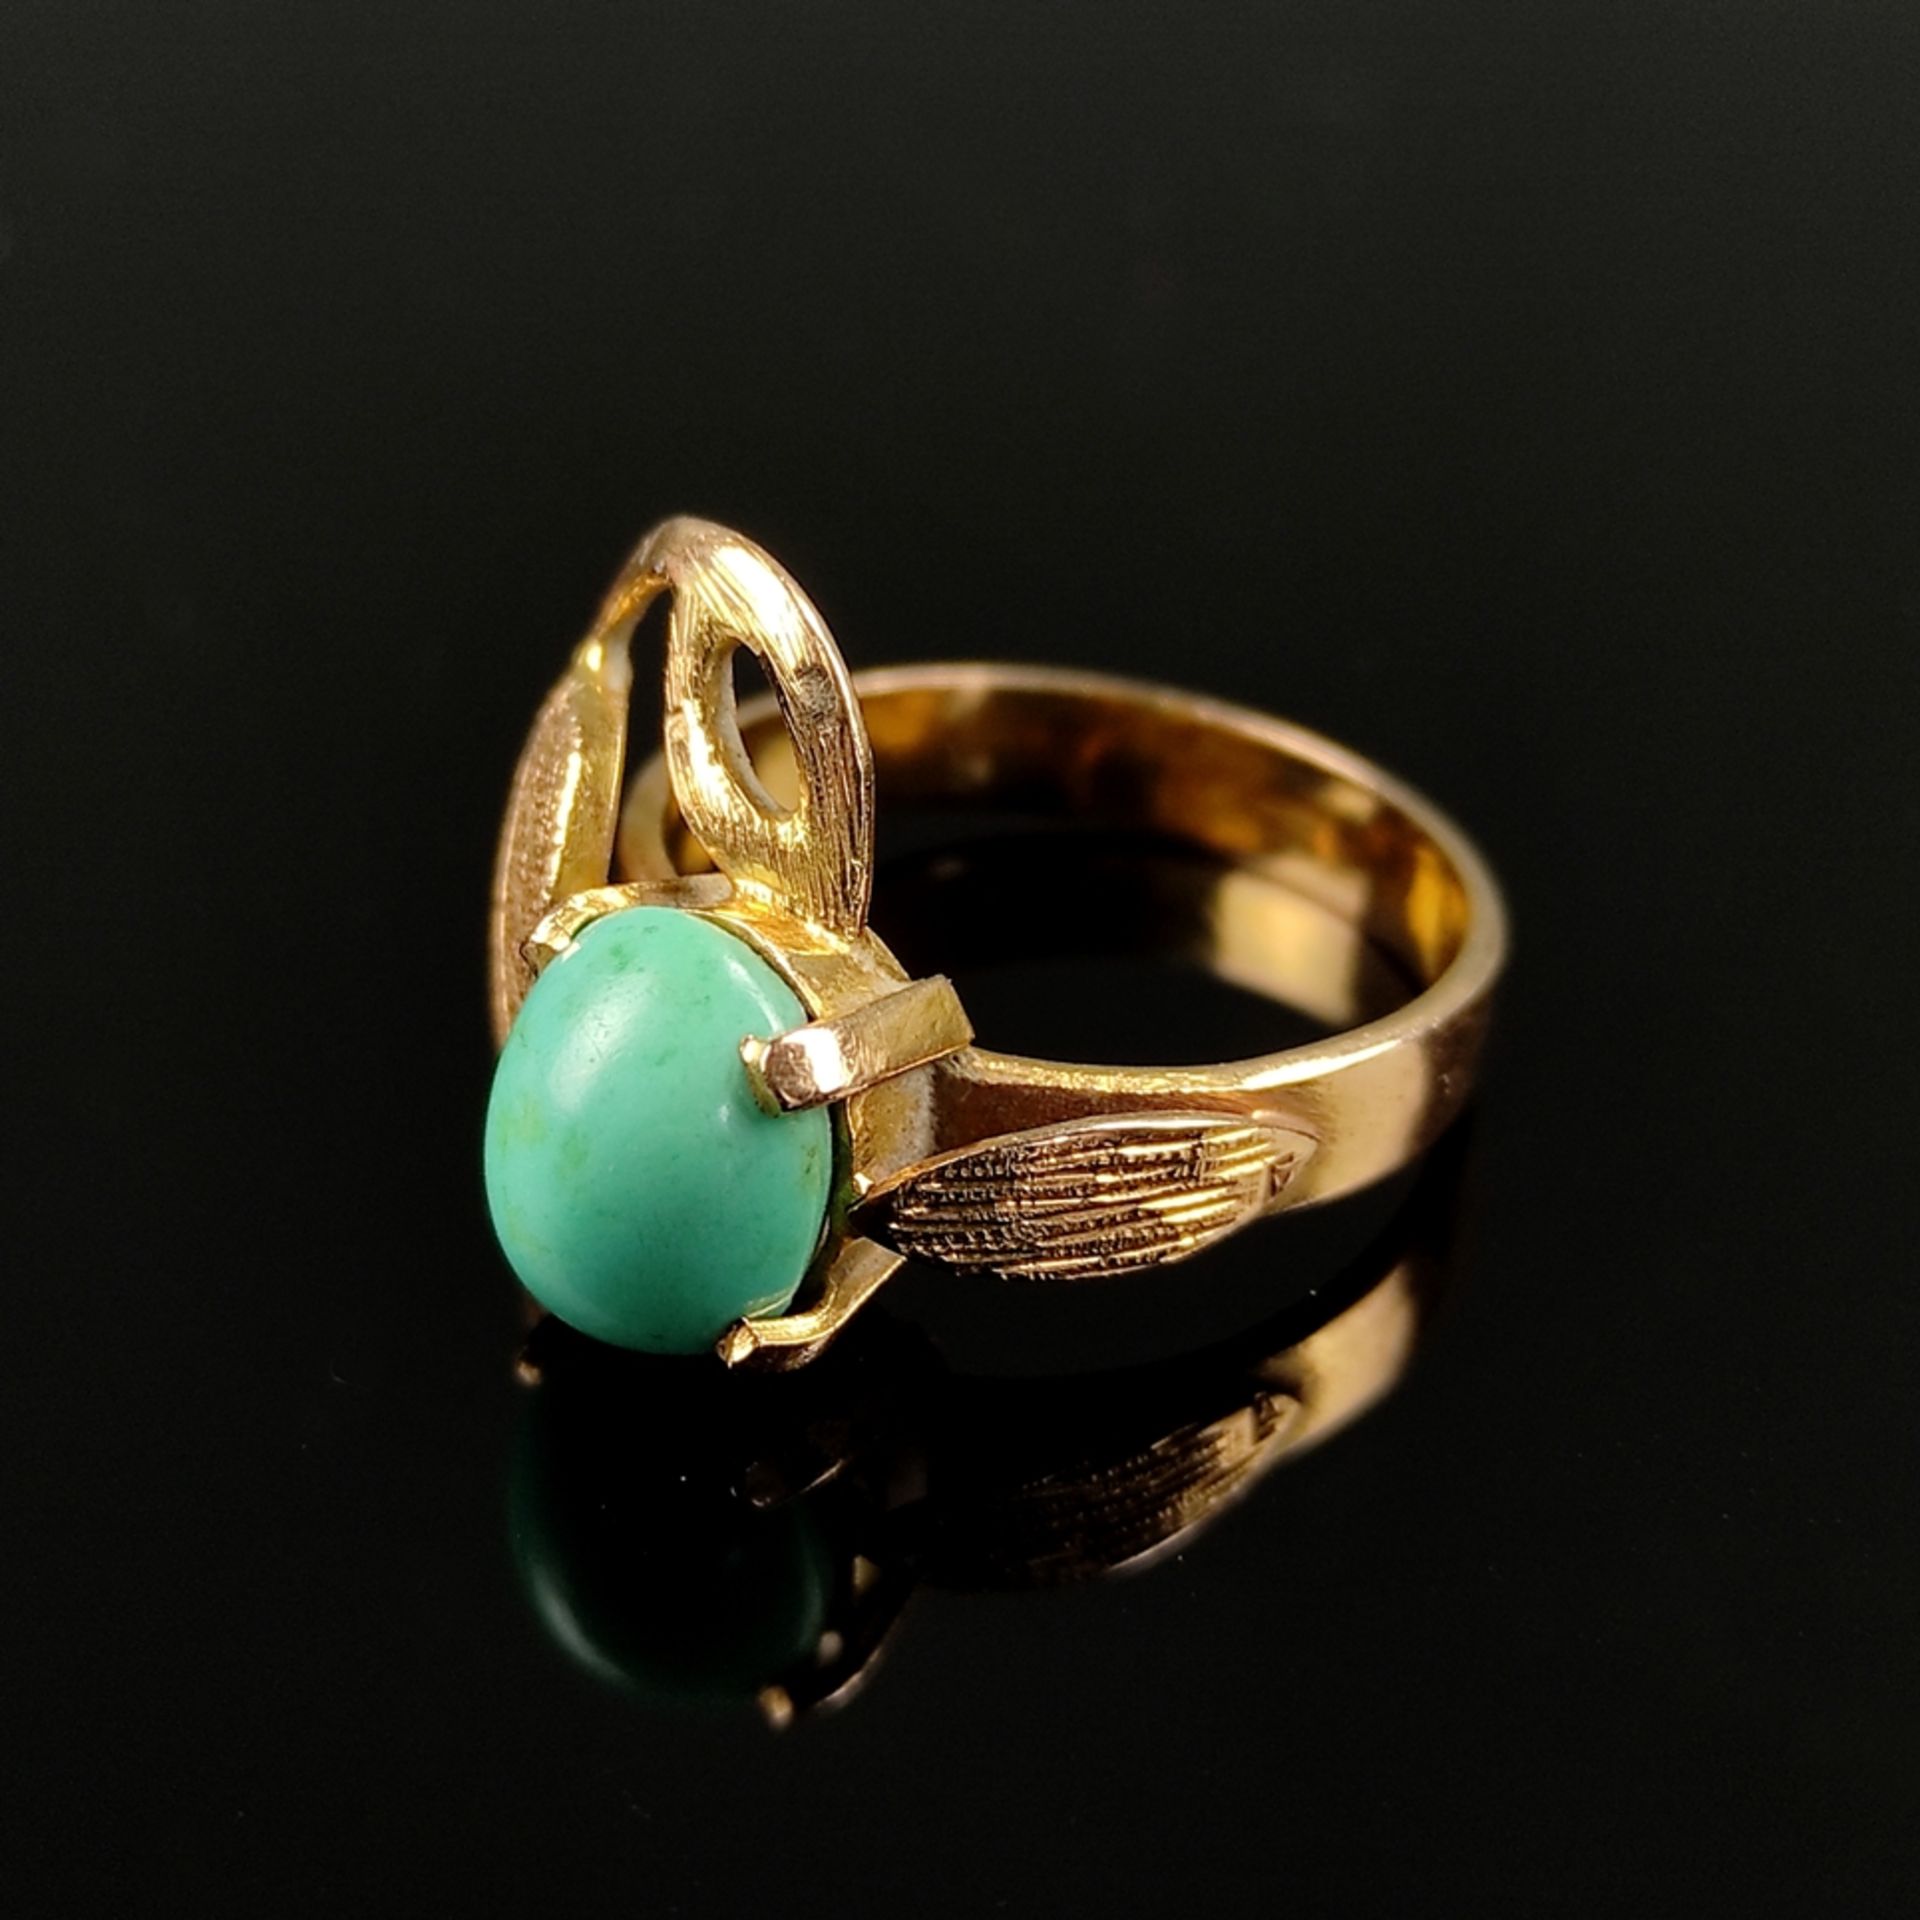 Turquoise ring, 750/18K yellow gold (tested), total weight 5.65g, front with oval turquoise cabocho